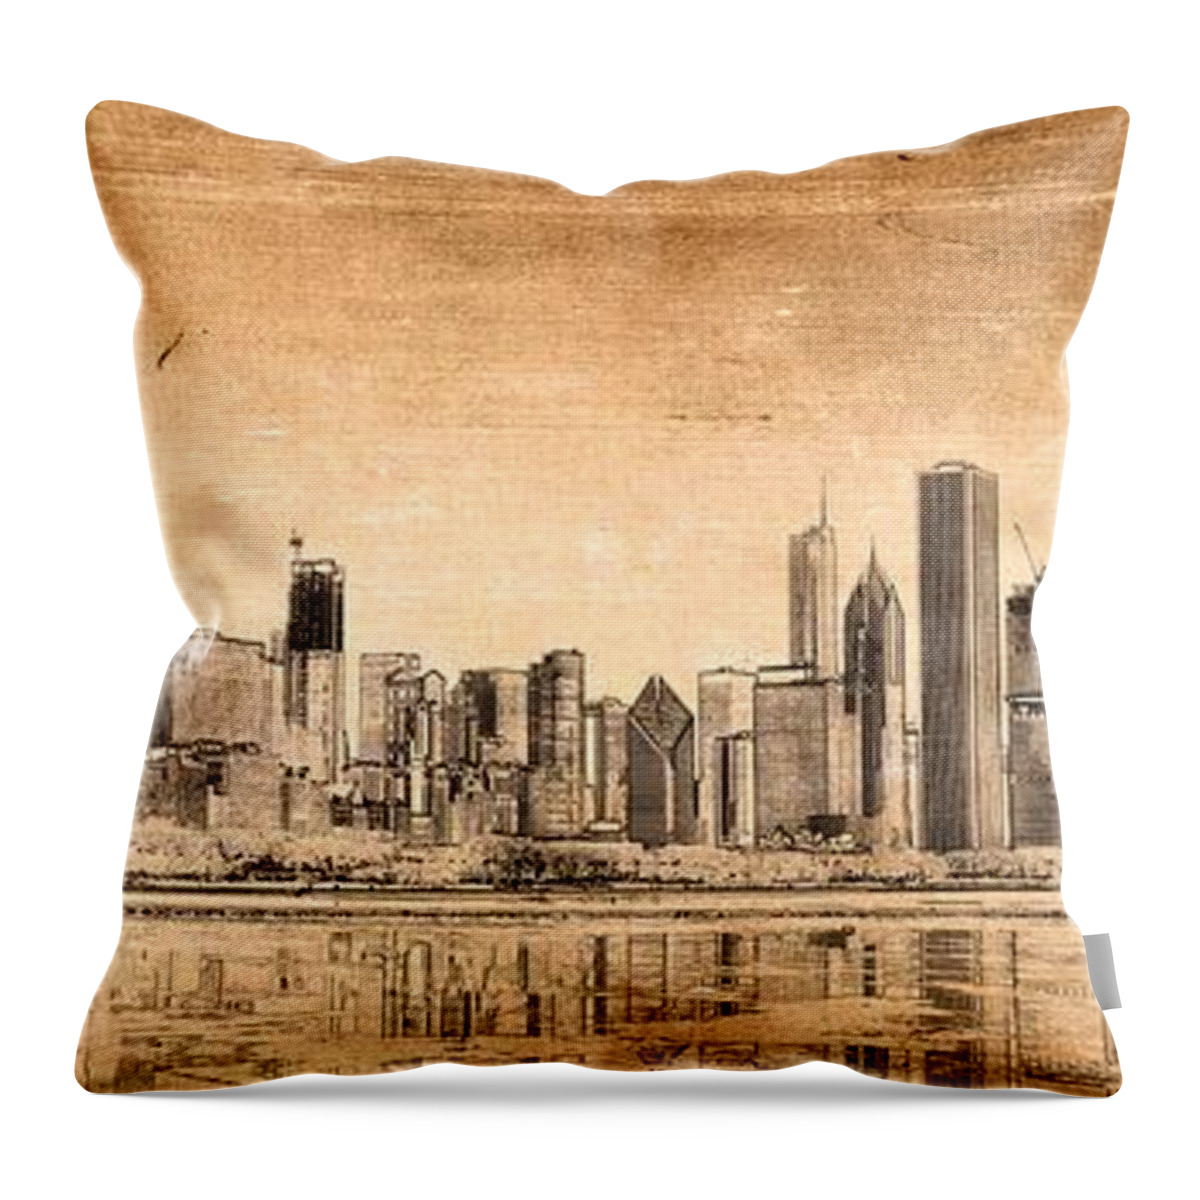 Chicago Panorama Throw Pillow featuring the digital art Chicago skyline by Dejan Jovanovic